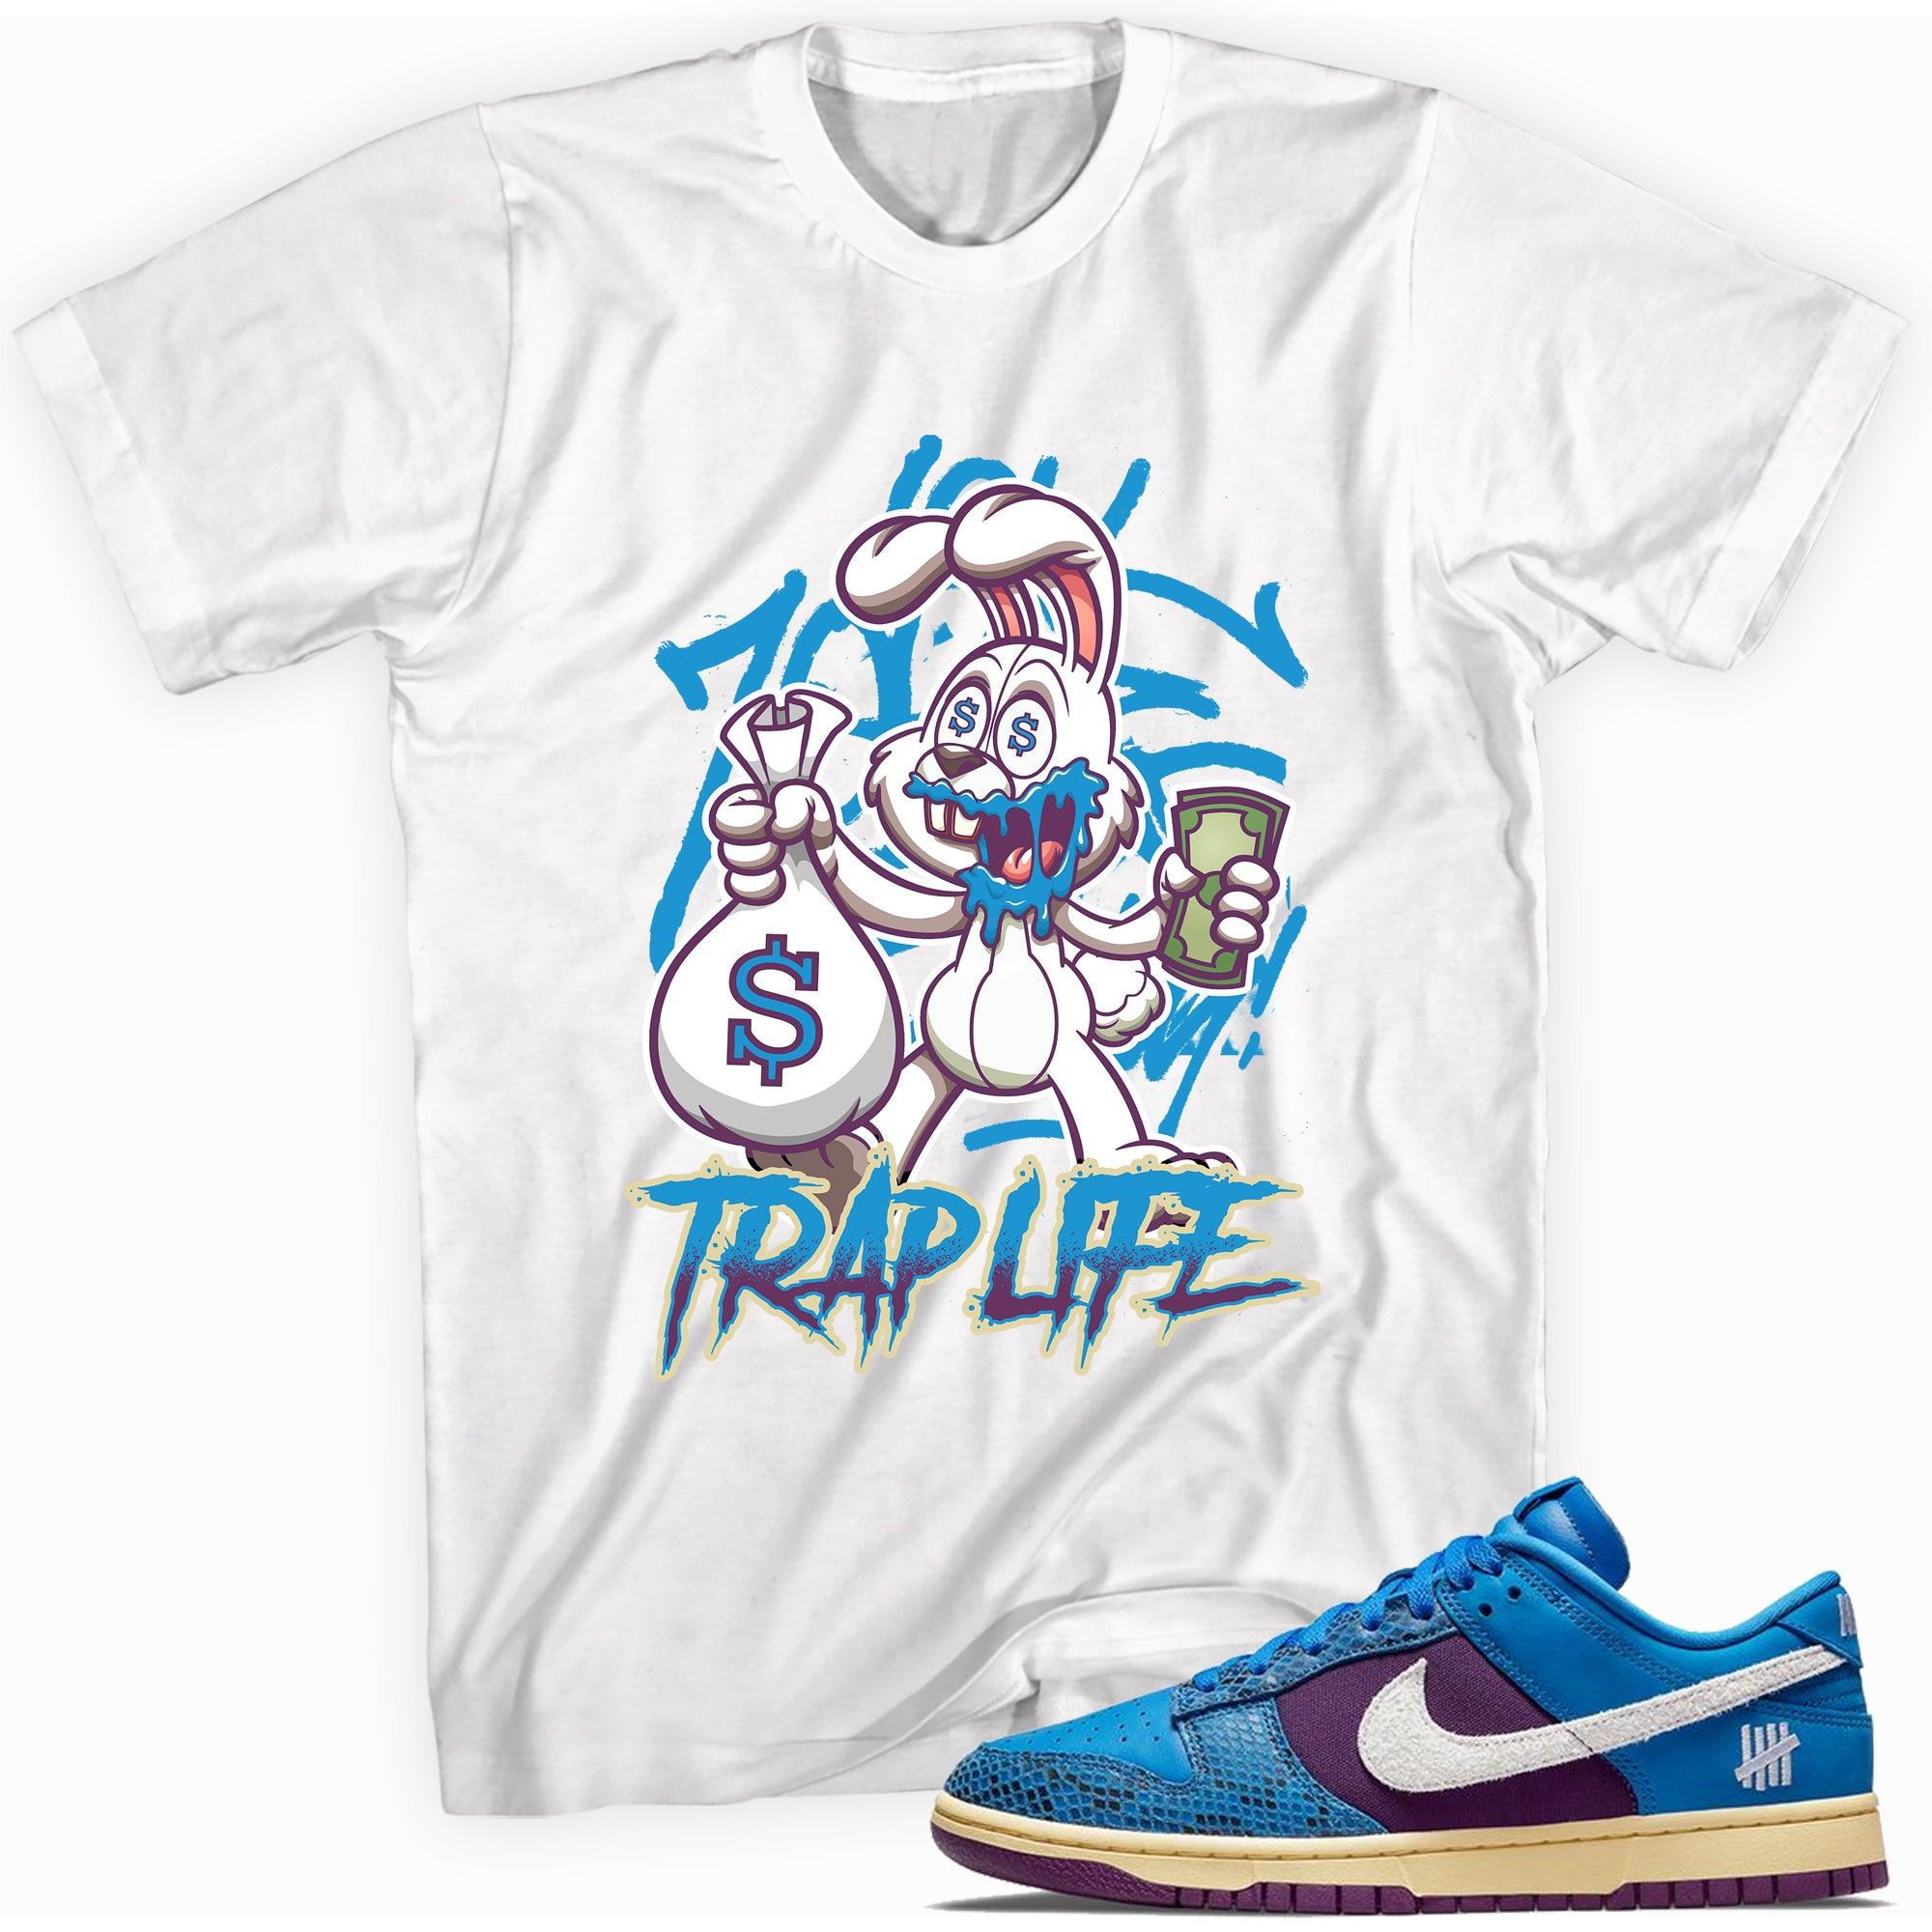 Trap Life Shirt Nike Dunk Low Undefeated 5 On It Dunk vs AF1 photo